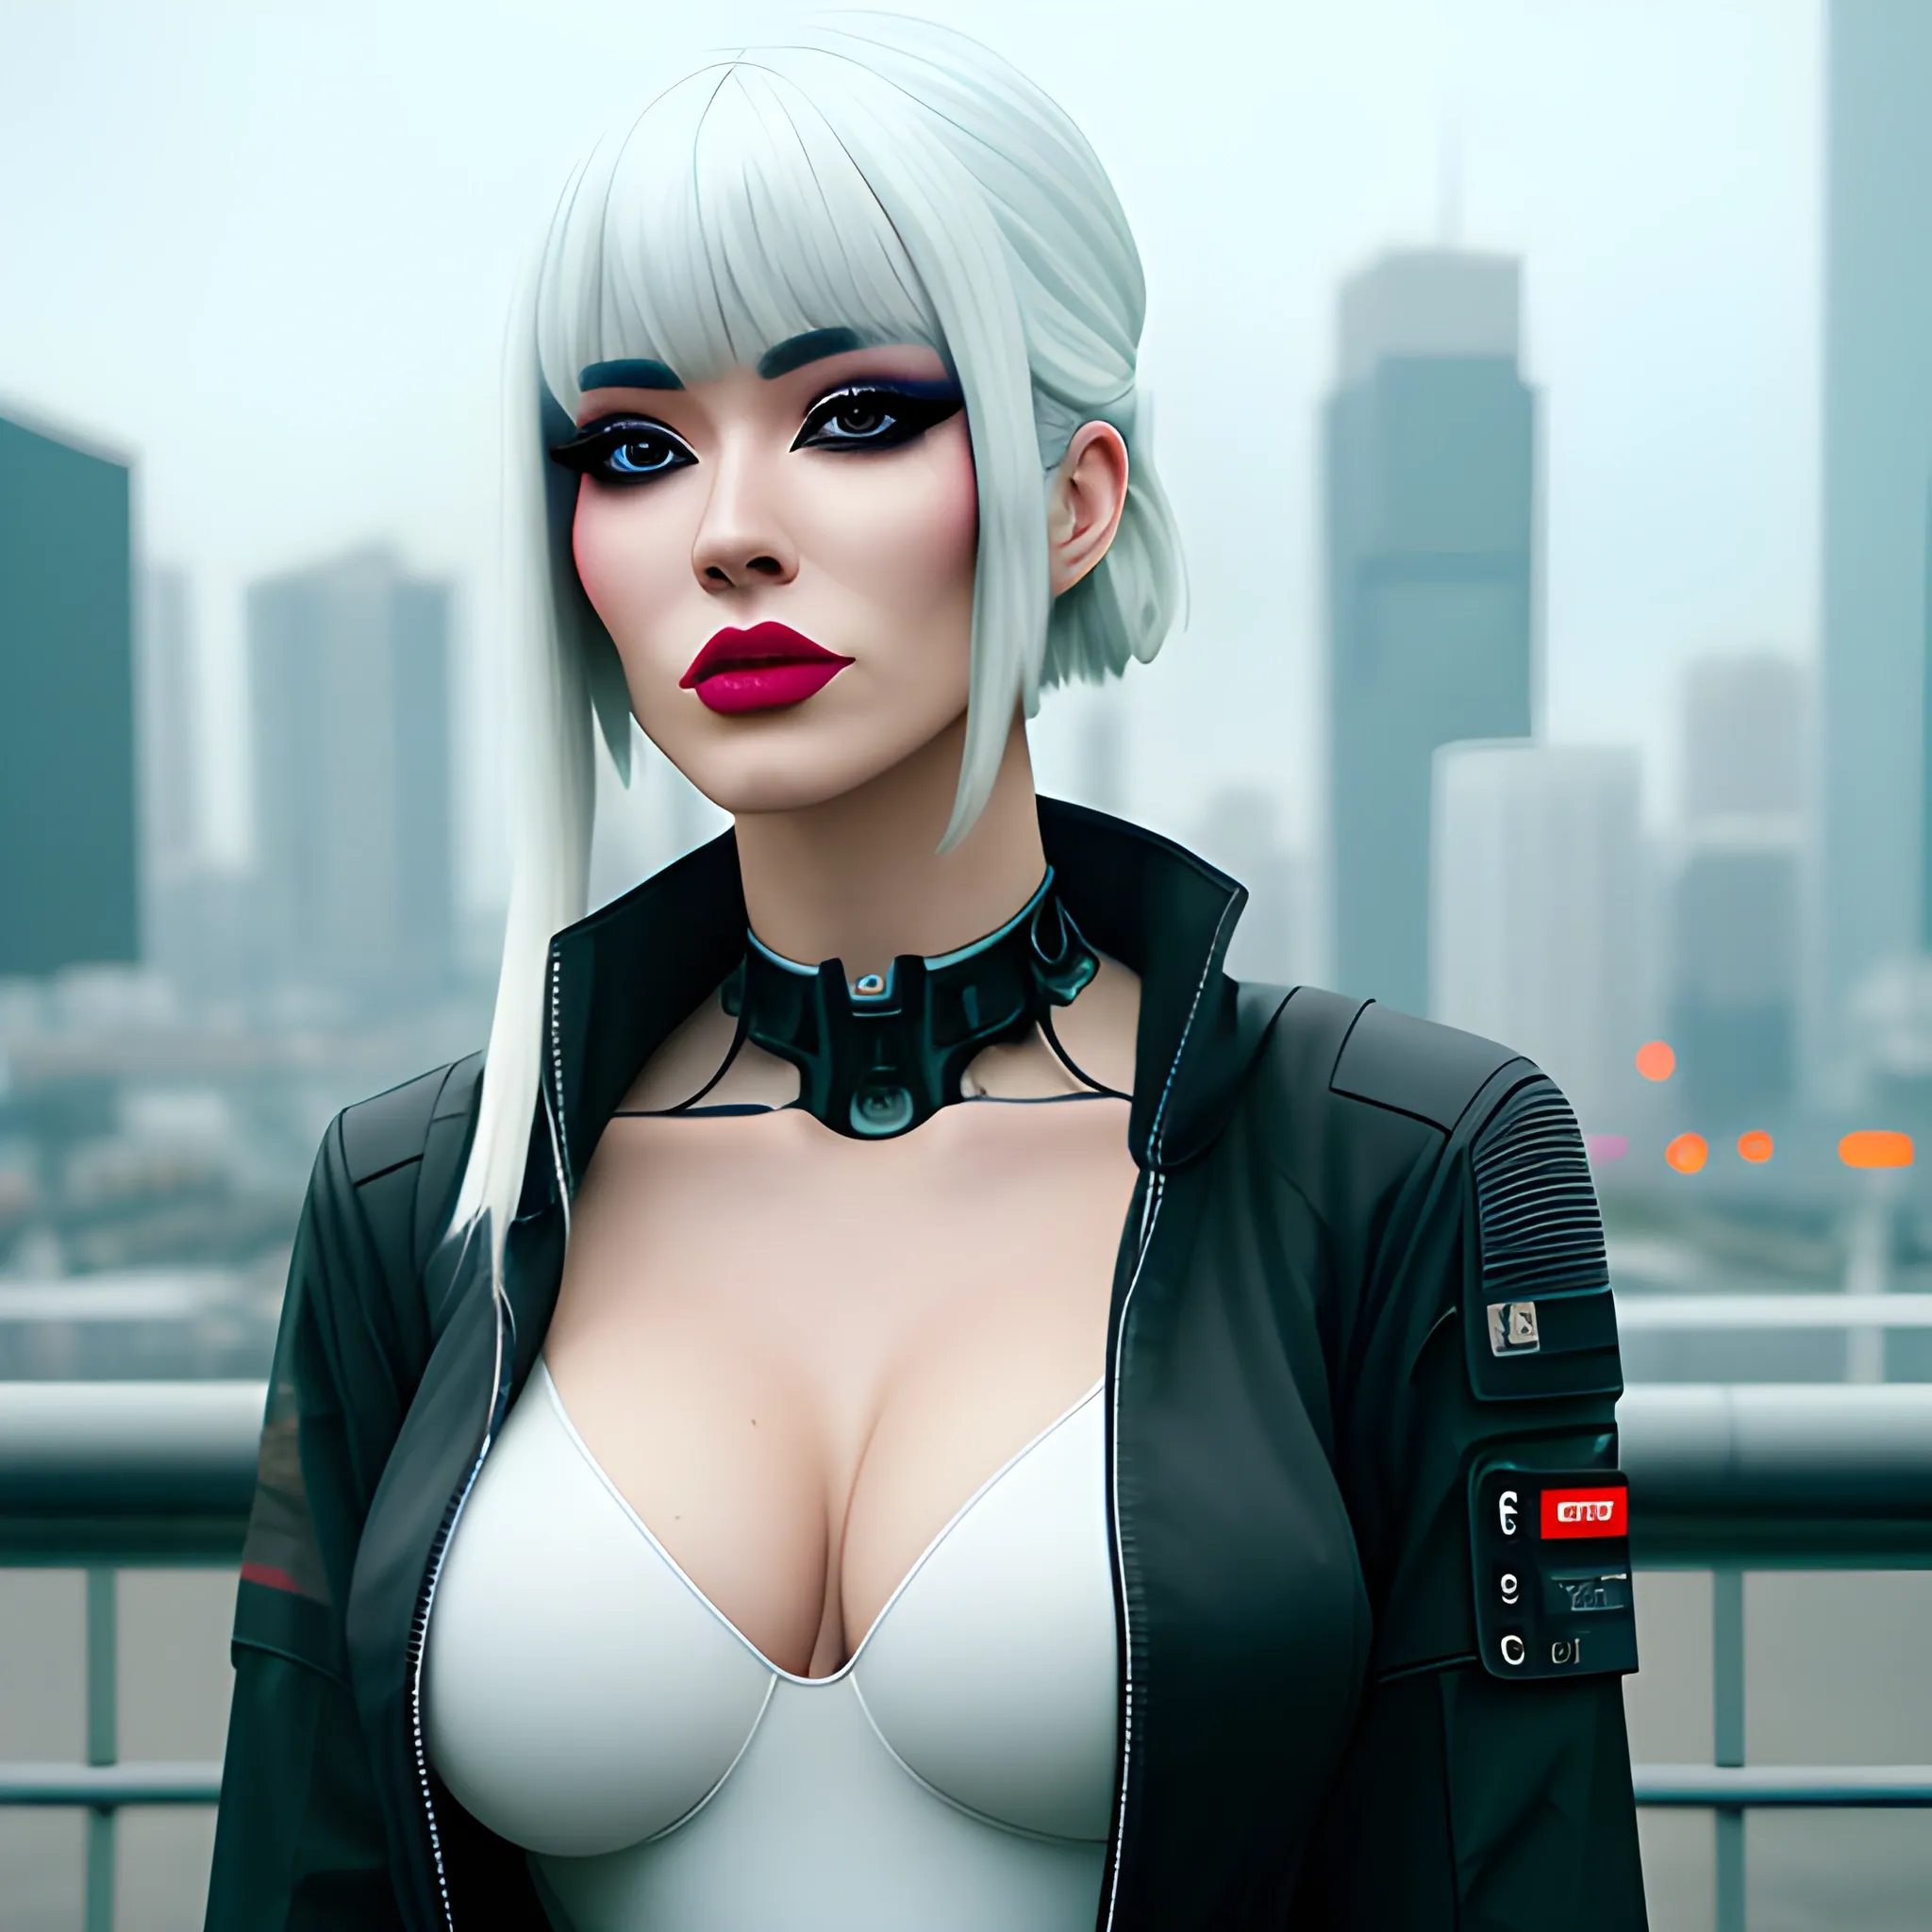 masterpiece, (photorealistic:1.4), best quality, beautiful lighting, (ulzzang-6500:0.5), lucy \(cyberpunk\), 1girl, white hair, against railing, arm rest, bangs, bare shoulders, belt, black belt, black leotard, black pants, blurry, bob cut, breasts, building, cityscape, clothing cutout, (cropped jacket), cyberpunk, depth of field, from side, gradient eyes, grey eyes, grey hair, white jacket, leotard, lips, long sleeves, looking afar, looking ahead, (mechanical parts), medium breasts, multicolored eyes, multicolored hair, night, night sky, off shoulder, open clothes, open jacket, outdoors, pants, parted lips, railing, red eyeliner, science fiction, short hair with long locks, short shorts, shorts, sidelocks, sky, solo, standing, teeth, thigh cutout, upper teeth only, white jacket, white shorts, cyberpunk \(series\), cyberpunk edgerunners, RAW photo, 8k uhd, film grain, cosplay, white wig, night, neon lights,,,, <lora:lucy_offset:1.21>
Negative prompt: BadDream, (UnrealisticDream:1.3)
Steps: 30, Size: 512x640, Seed: 5775676, Model: DreamShaper_7_pruned, Version: v1.3.2, Sampler: DPM++ SDE Karras, CFG scale: 9, Clip skip: 2, Model hash: ed989d673d, Hires steps: 15, lucy_offset: 1> ", "lucy_offset: f7a664103d28", (ulzzang-6500: 0.6), lucy \\(cyberpunk\\), 1girl, gradient eyes, grey eyes, white hair, multicolored eyes, multicolored hair, (red eyeliner), science fiction, short hair with long locks, sidelocks, RAW photo, 8k uhd, film grain, Hires upscale: 2.65, Hires upscaler: 8x_NMKD-Superscale_150000_G, (photorealistic: 1.4), best quality, beautiful lighting, ADetailer model: face_yolov8n.pt, ADetailer prompt: "masterpiece, (UnrealisticDream: 1.3)", ADetailer version: 23.6.1.post0, Denoising strength: 0.4, ADetailer mask blur: 4, ADetailer model 2nd: hand_yolov8n.pt, ADetailer confidence: 0.3, ADetailer prompt 2nd: beautiful hands, ADetailer dilate/erode: 4, ADetailer mask blur 2nd: 4, ADetailer confidence 2nd: 0.3, ADetailer inpaint padding: 0, ADetailer negative prompt: "BadDream, ADetailer dilate/erode 2nd: 4, ADetailer denoising strength: 0.4, ADetailer inpaint only masked: True, ADetailer inpaint padding 2nd: 32, ADetailer negative prompt 2nd: "BadDream, ADetailer denoising strength 2nd: 0.3, ADetailer inpaint only masked 2nd: True